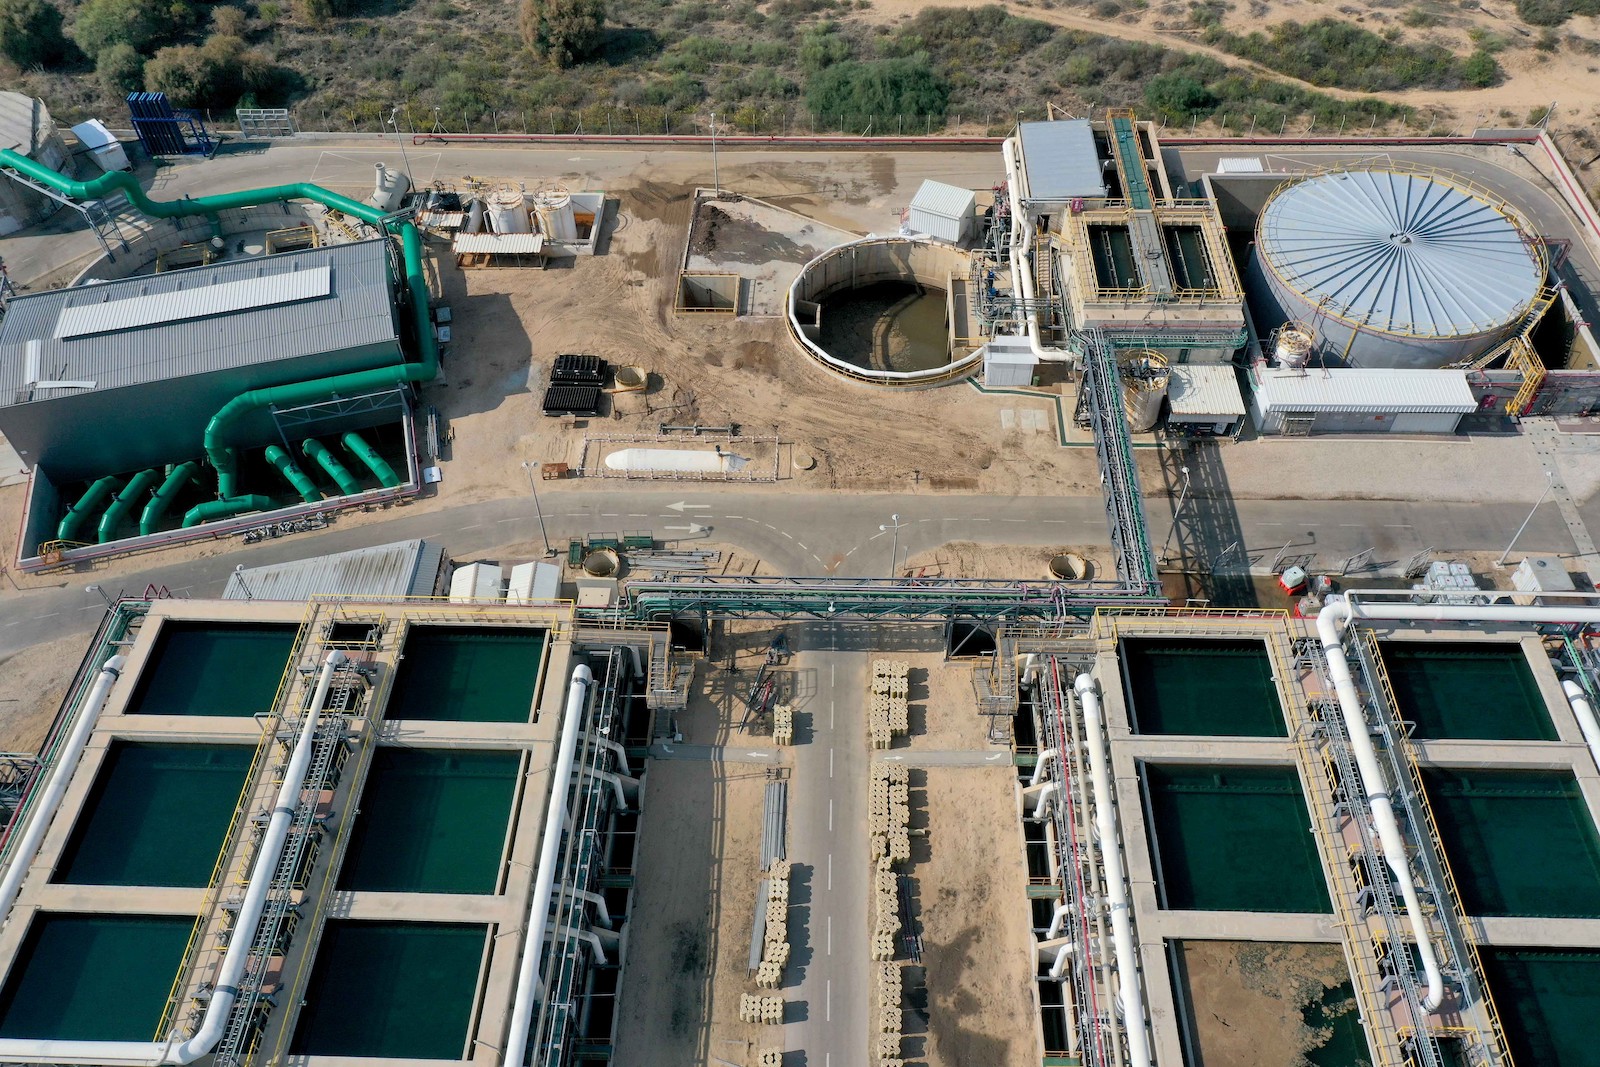 An aerial view of a desalination plant including pools of water and pipes